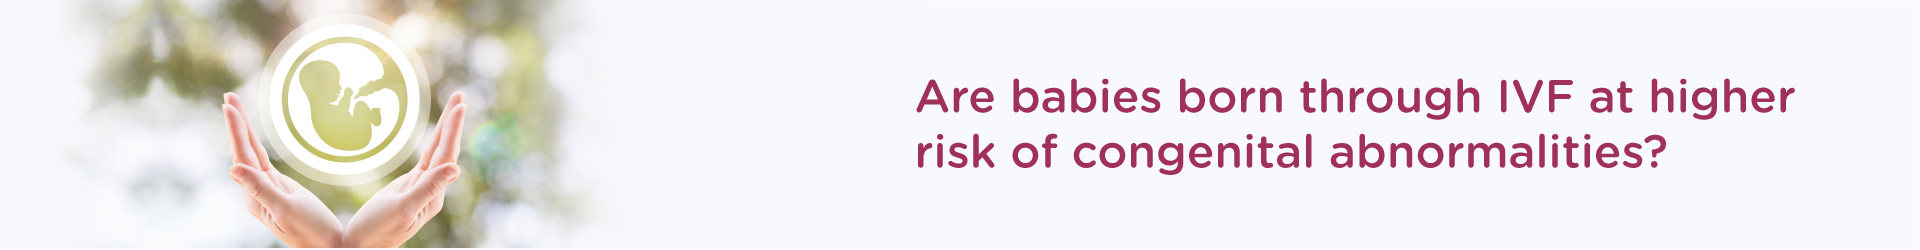 Are babies born through IVF at higher risk of congenital abnormalities?